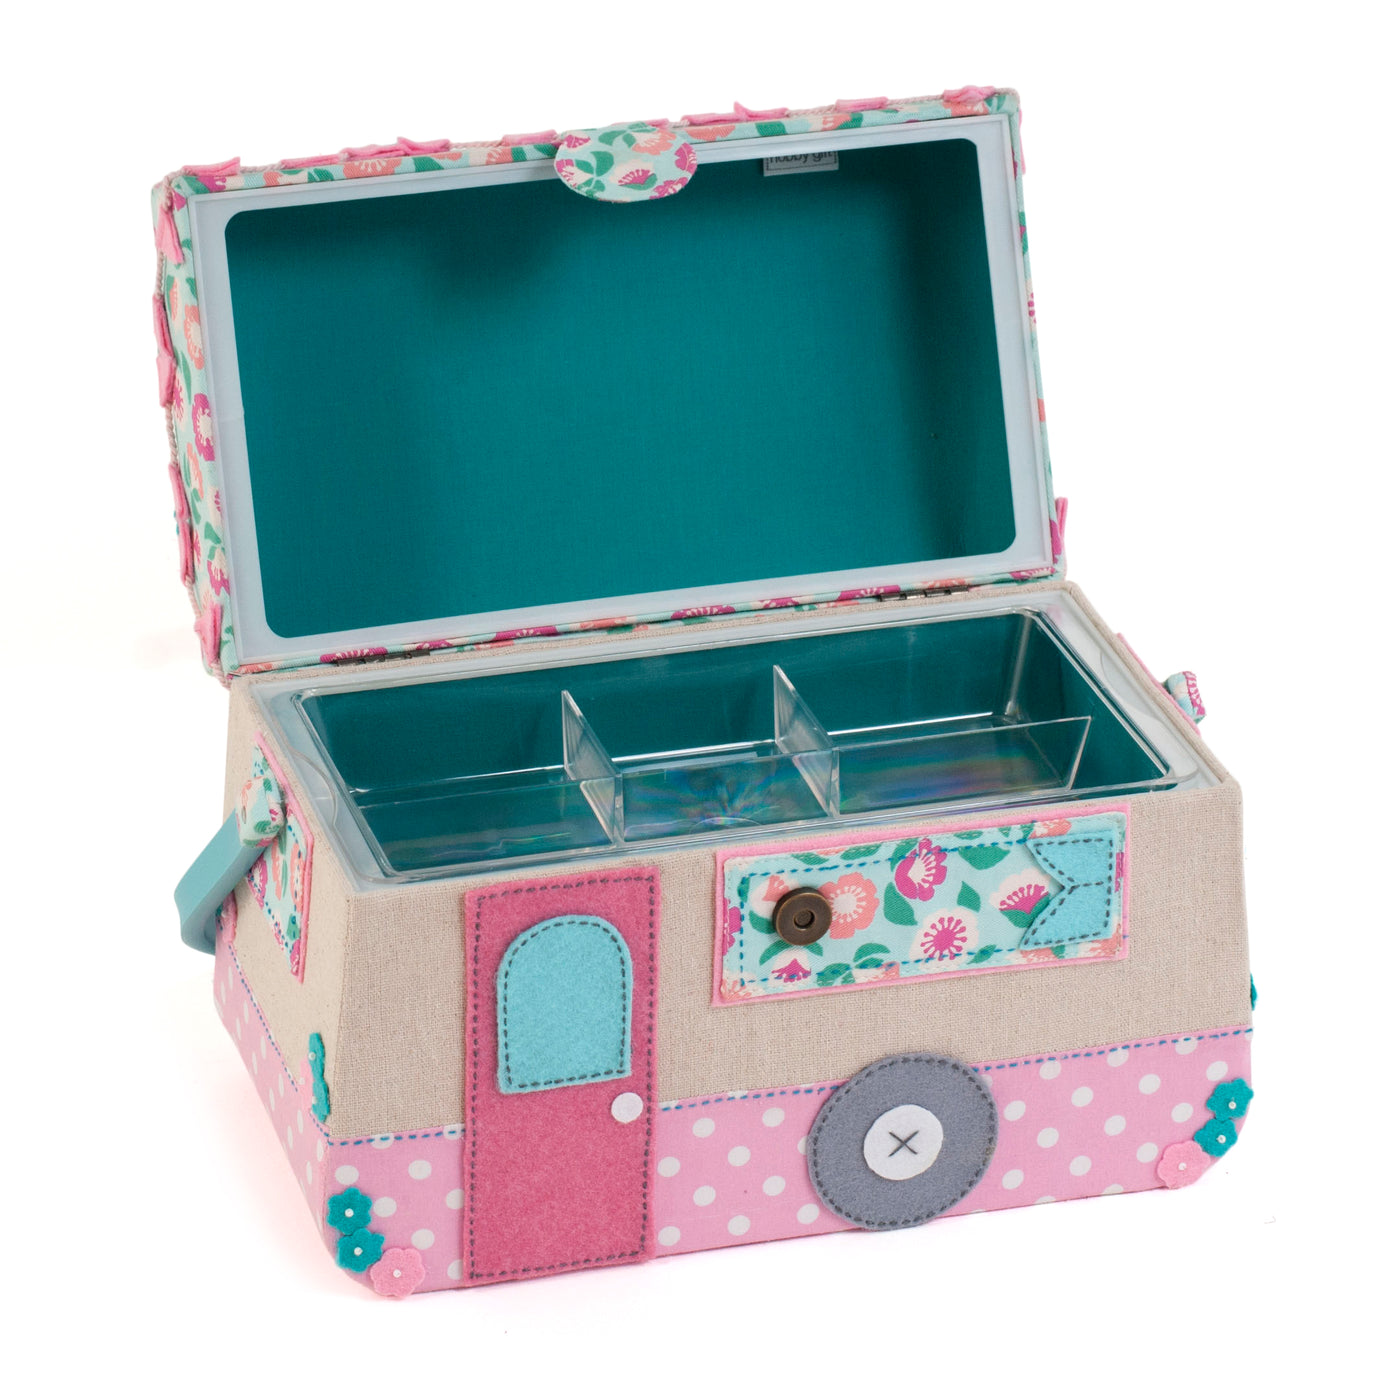 Novelty Caravan sewing box (20.5 x 31 x 16cm.). With lift out compartment.